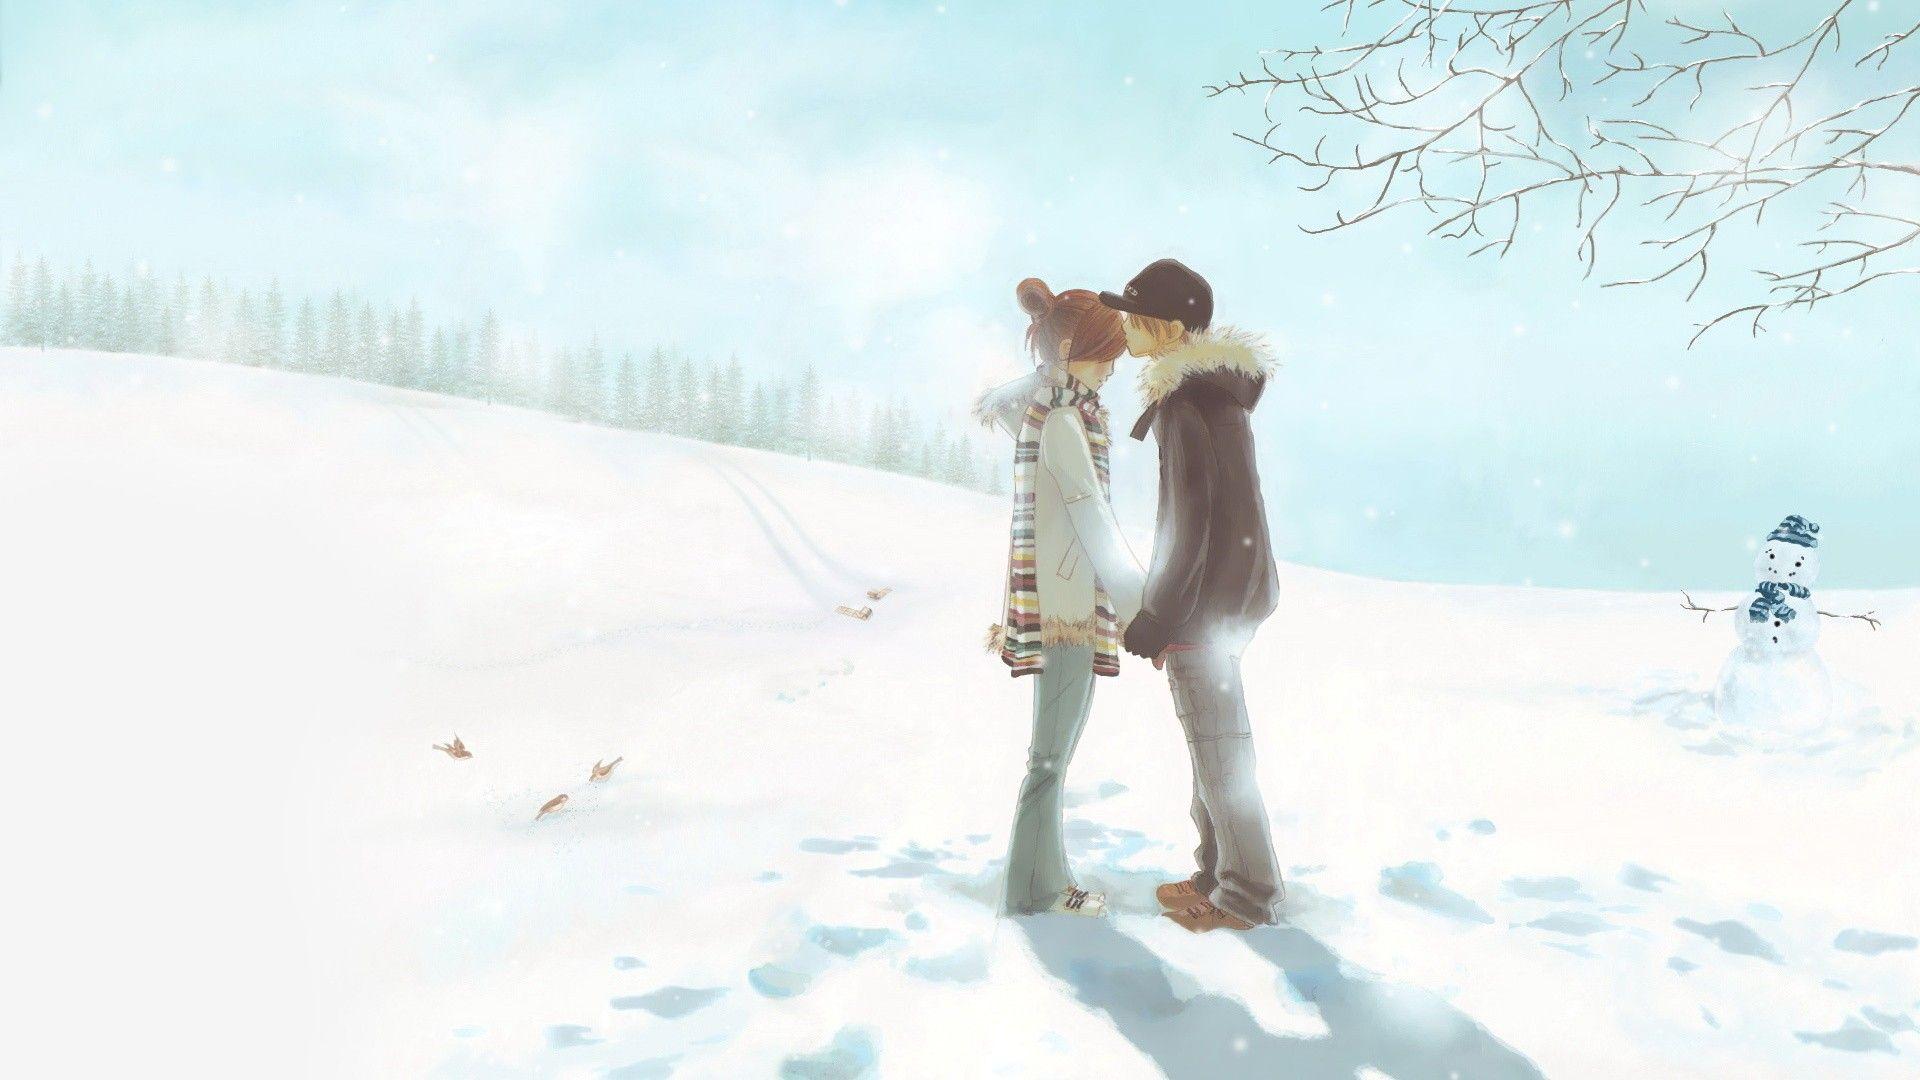 Download wallpaper 800x1200 girl phone snow winter anime iphone 4s4  for parallax hd background